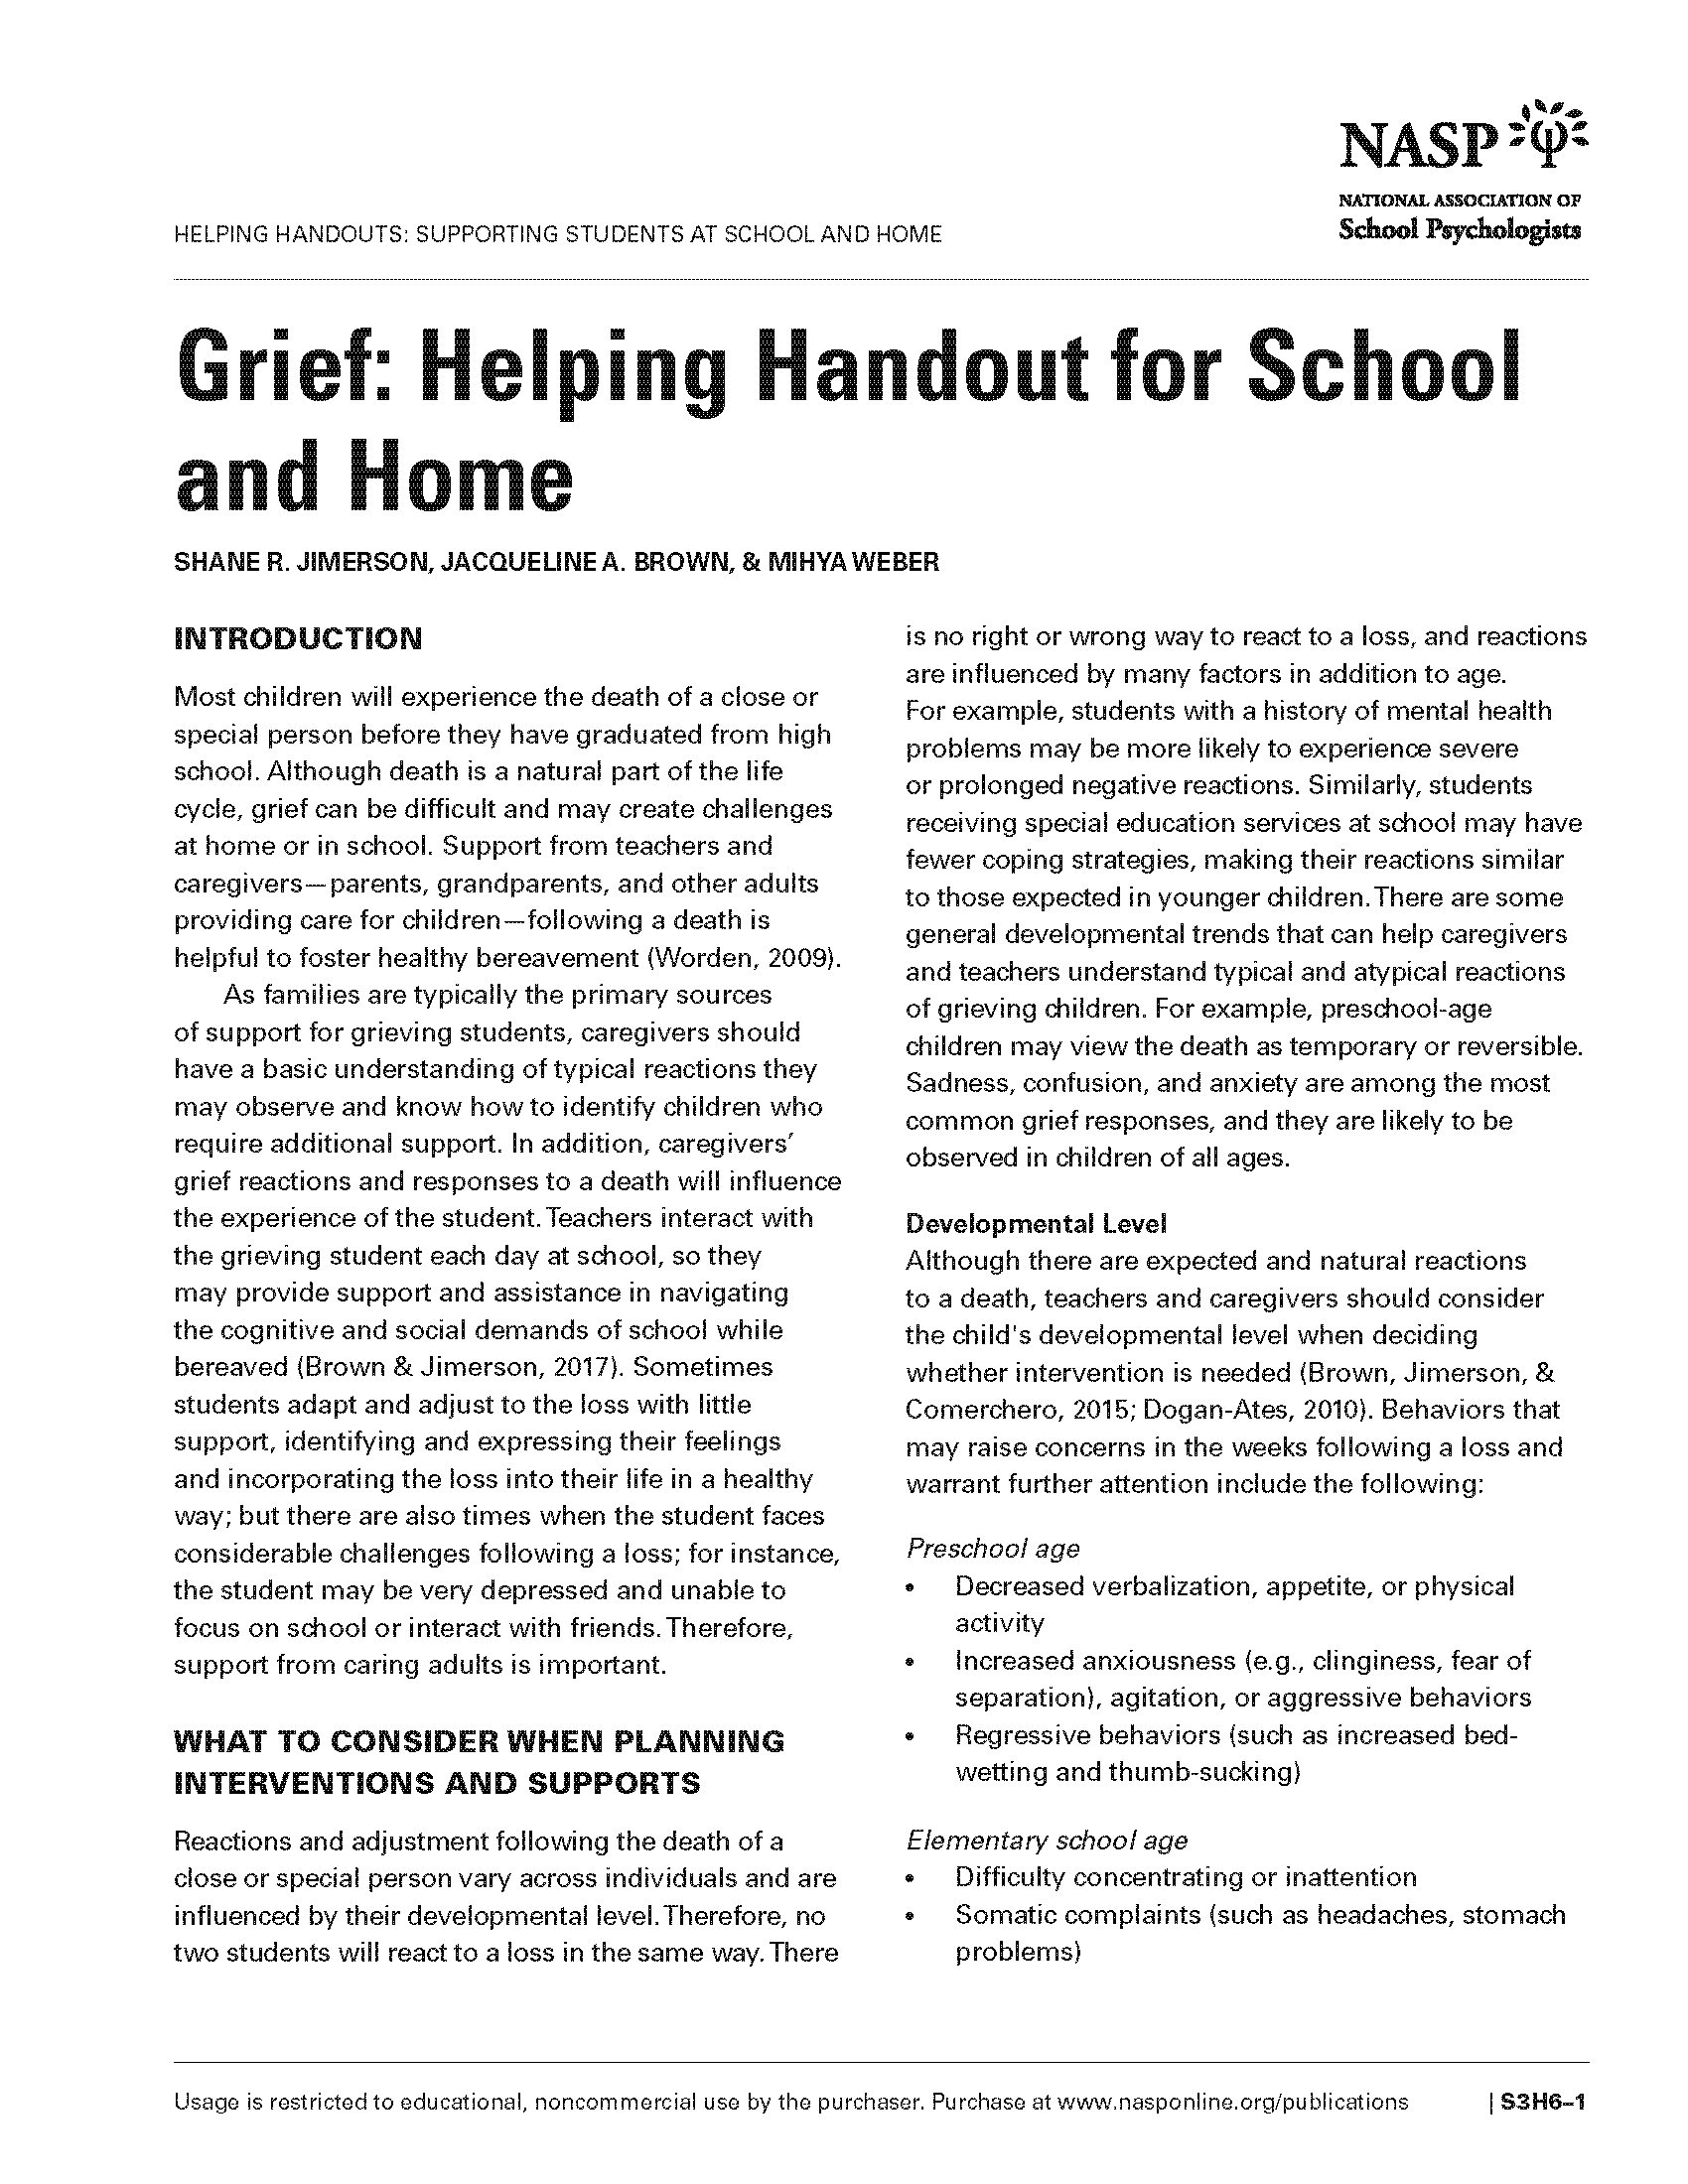 Grief: Helping Handout for School and Home